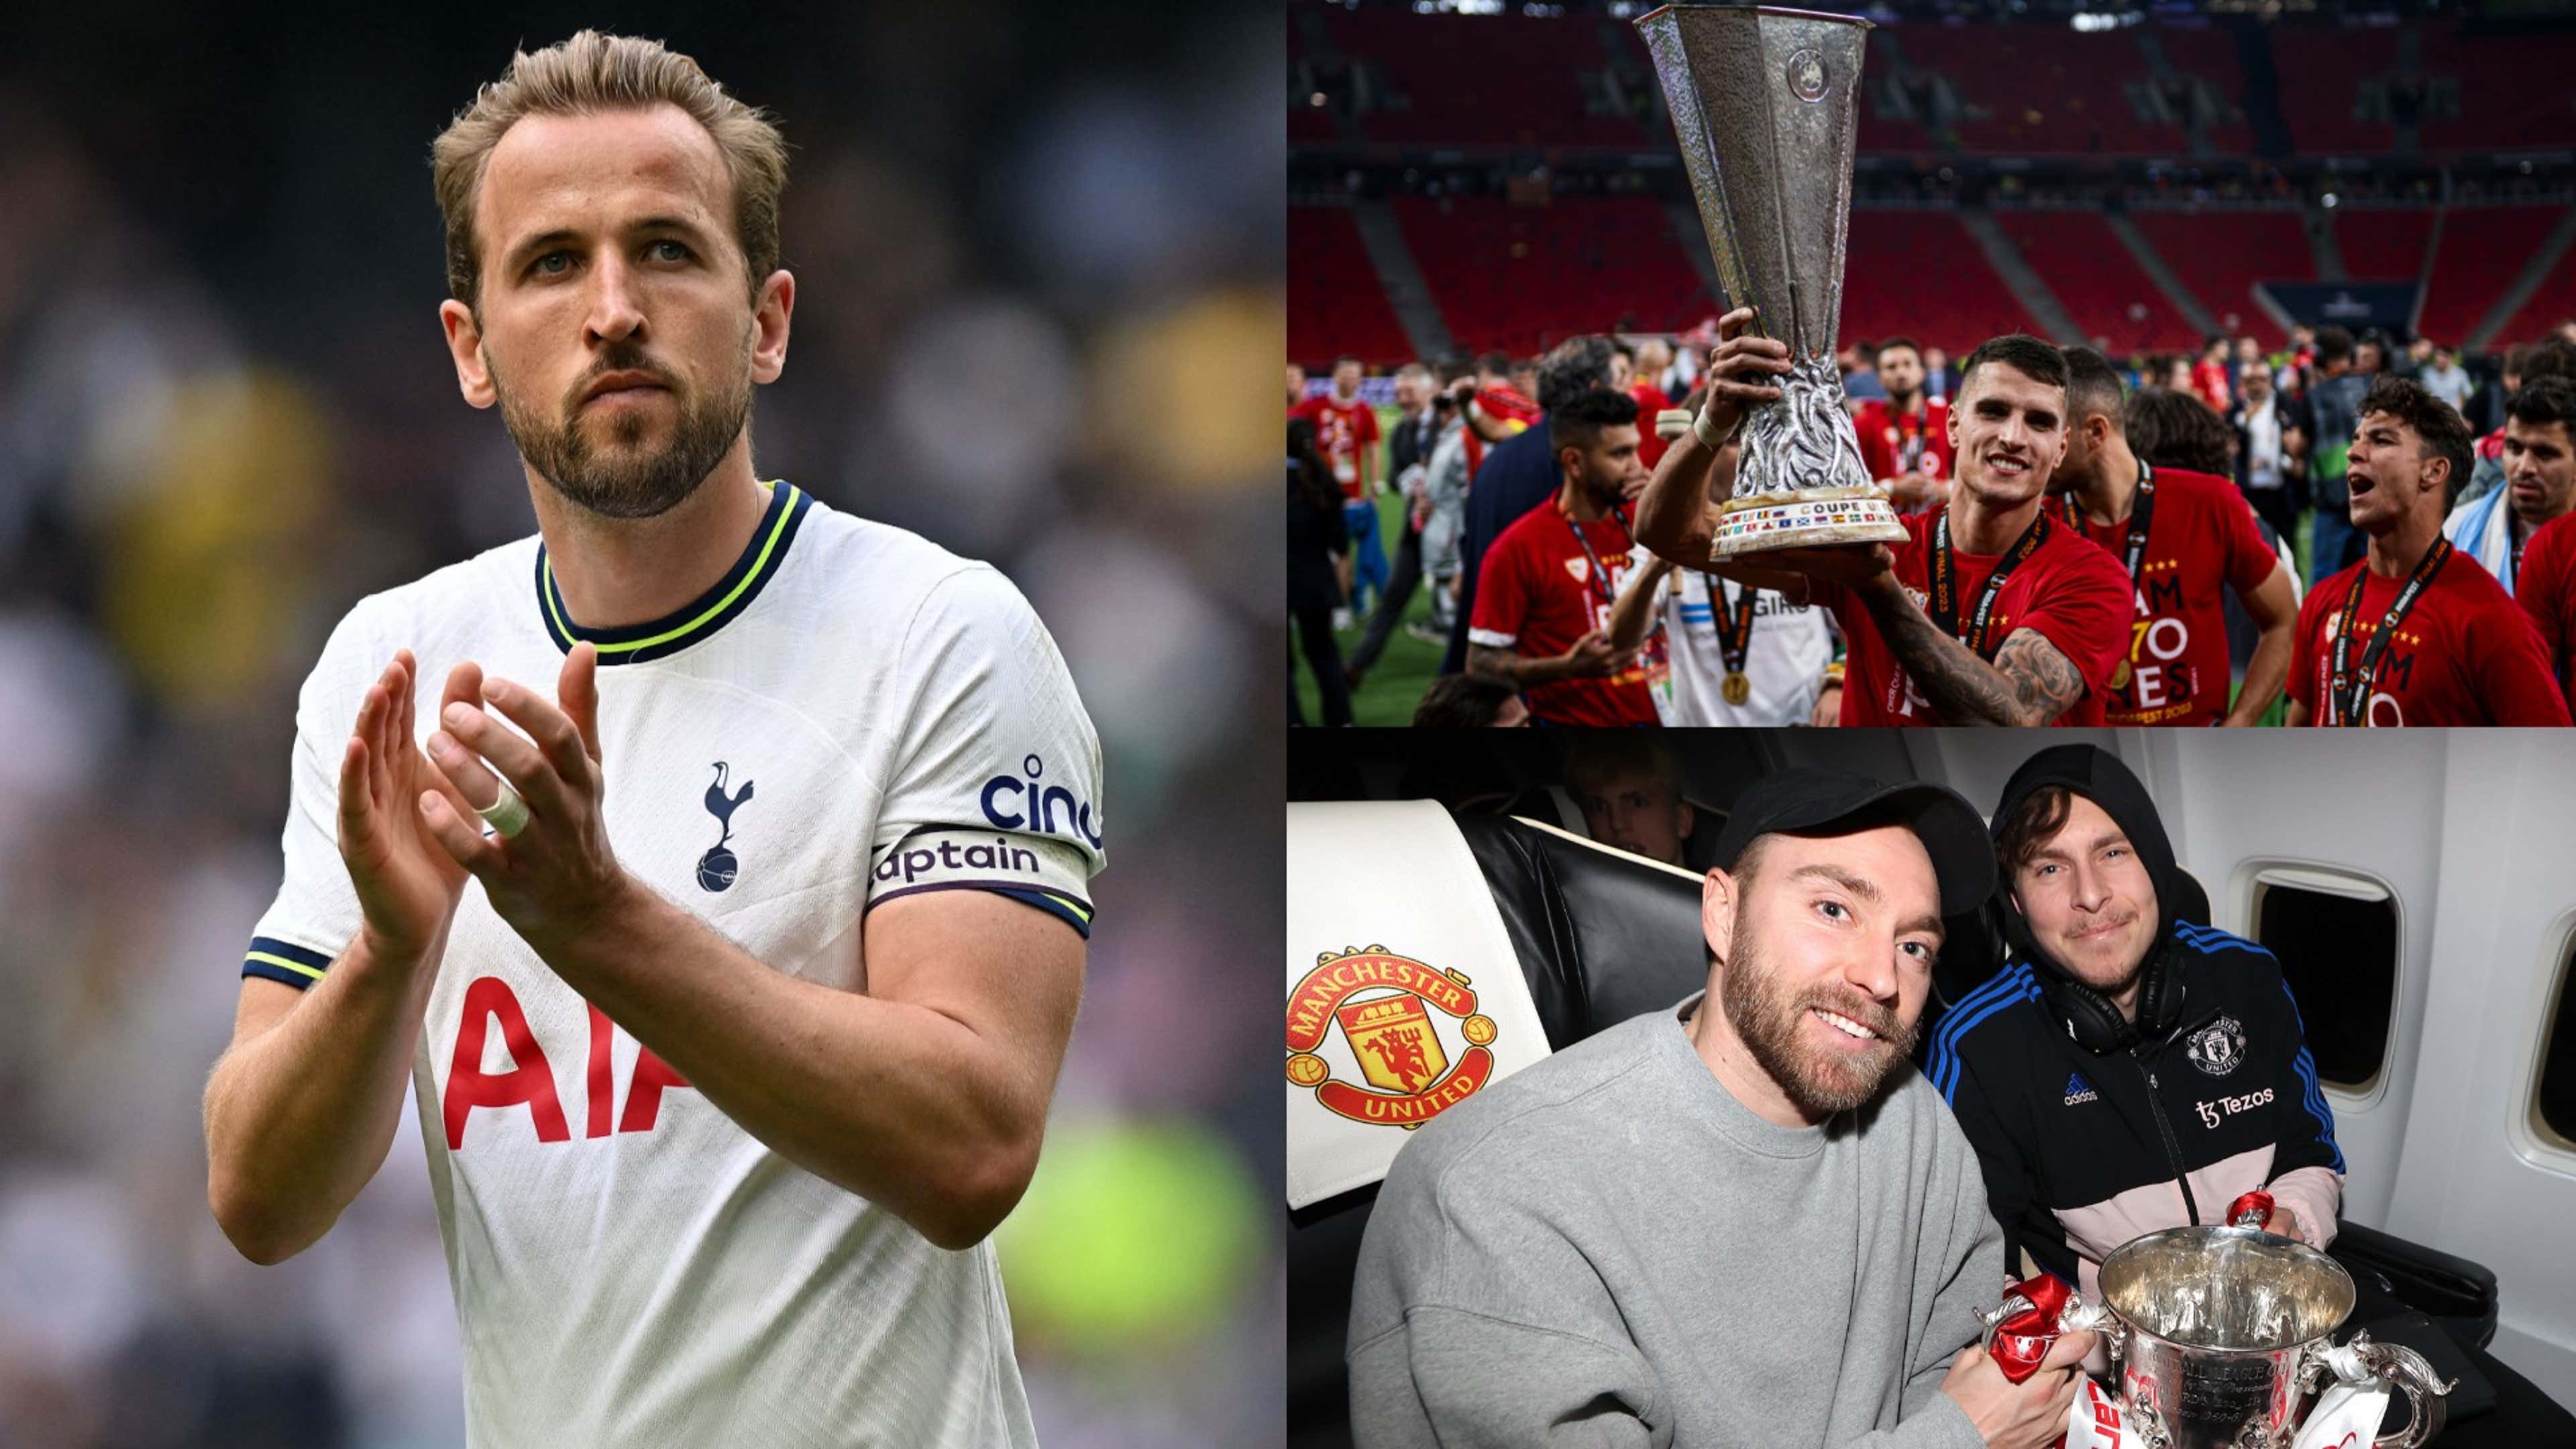 Football news - 'Normal service resumes': Fans react to Harry Kane